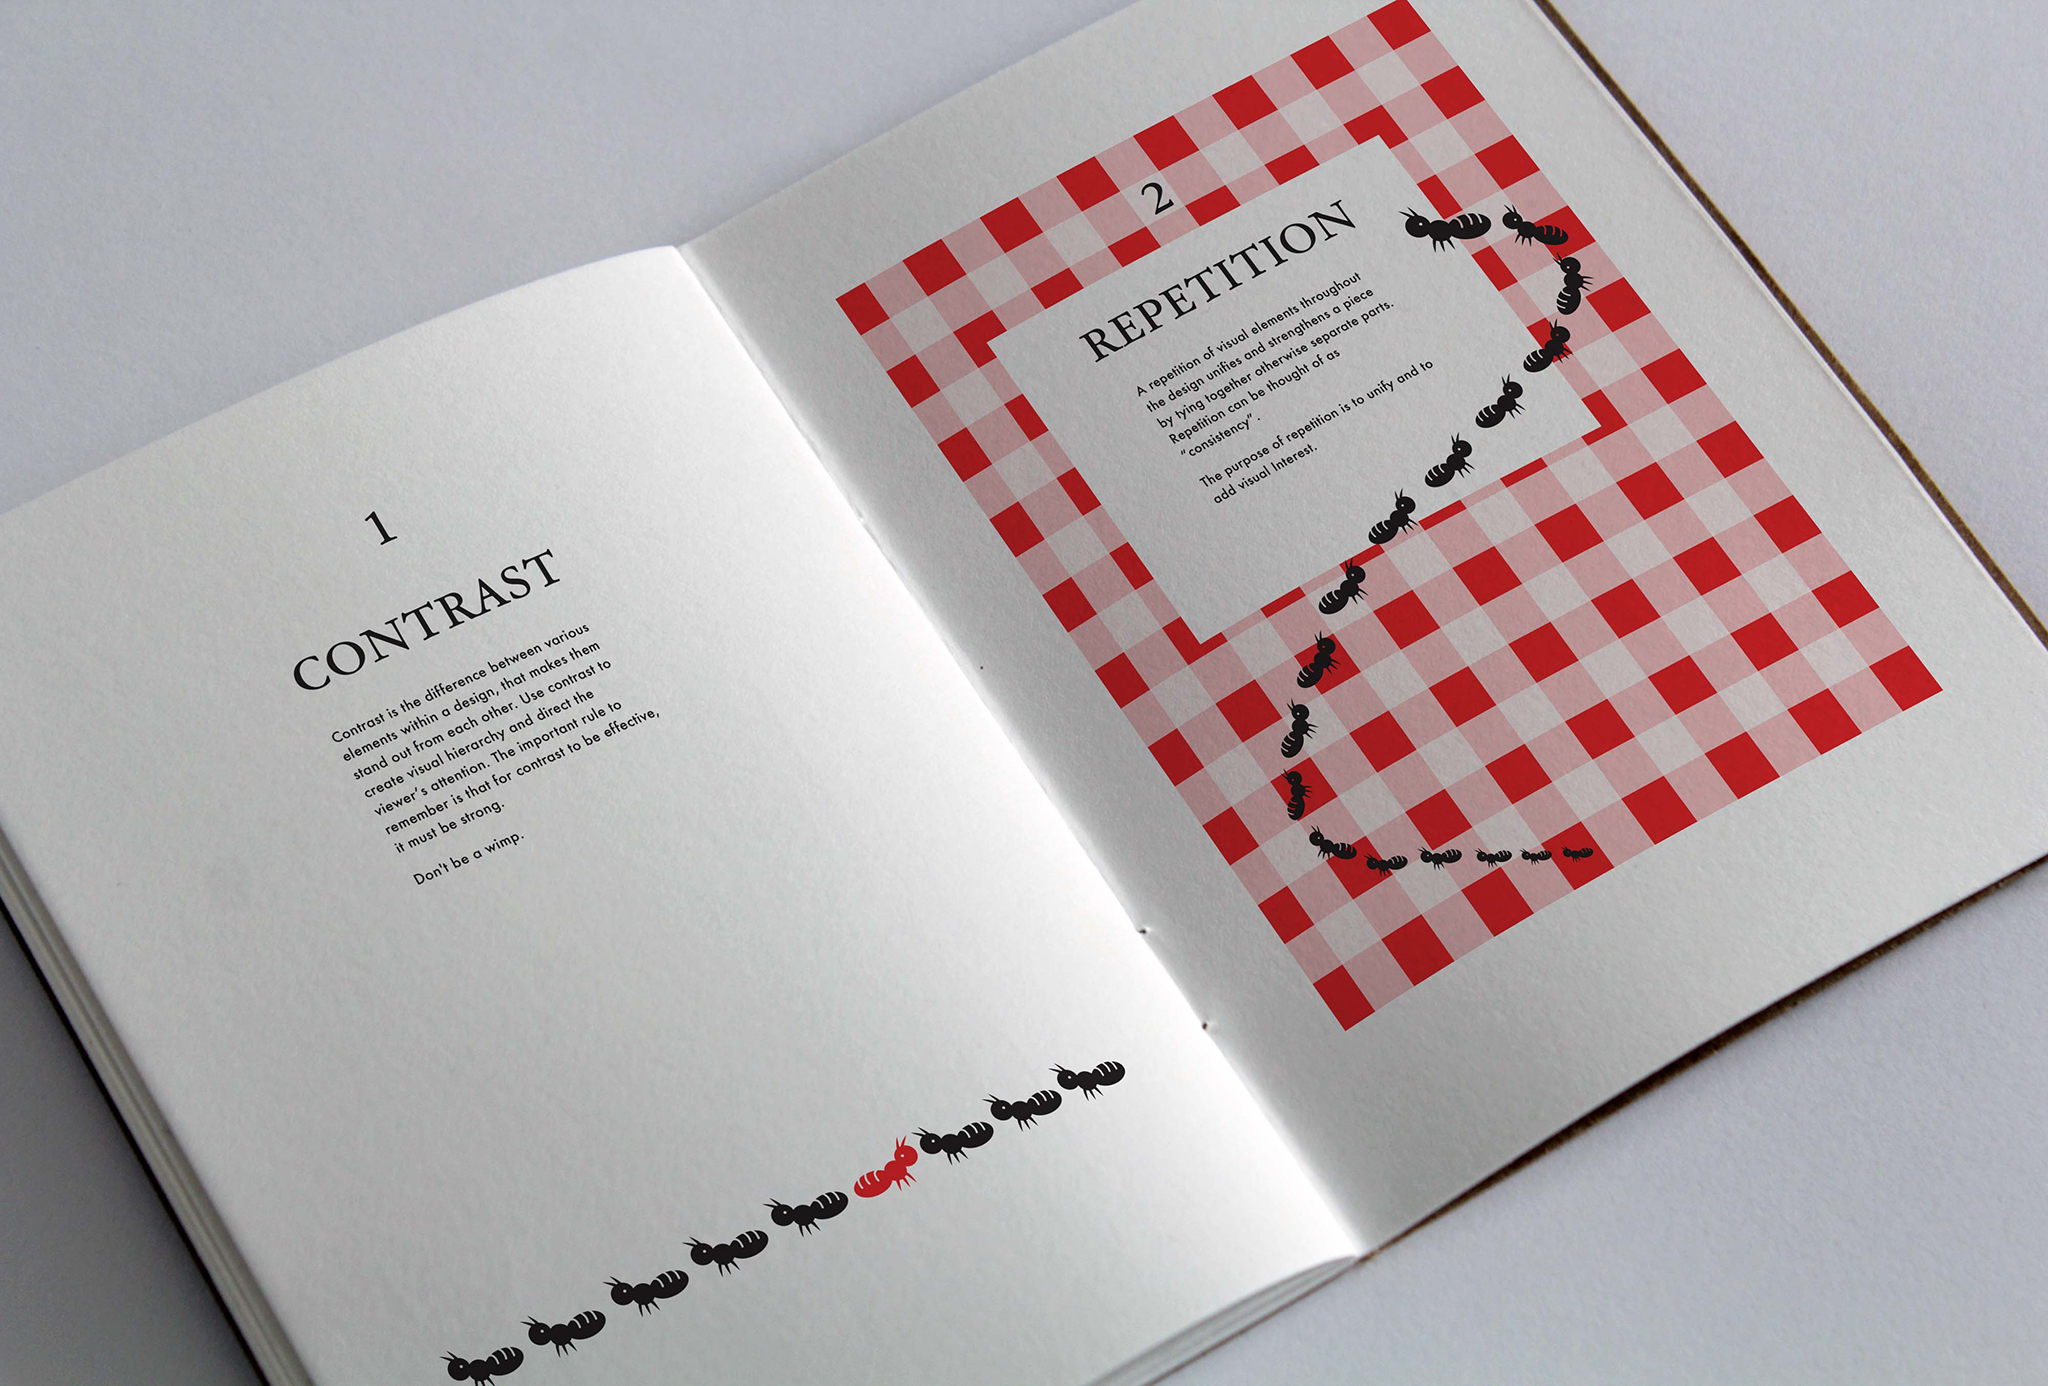 A book explaining the principles of design with ants